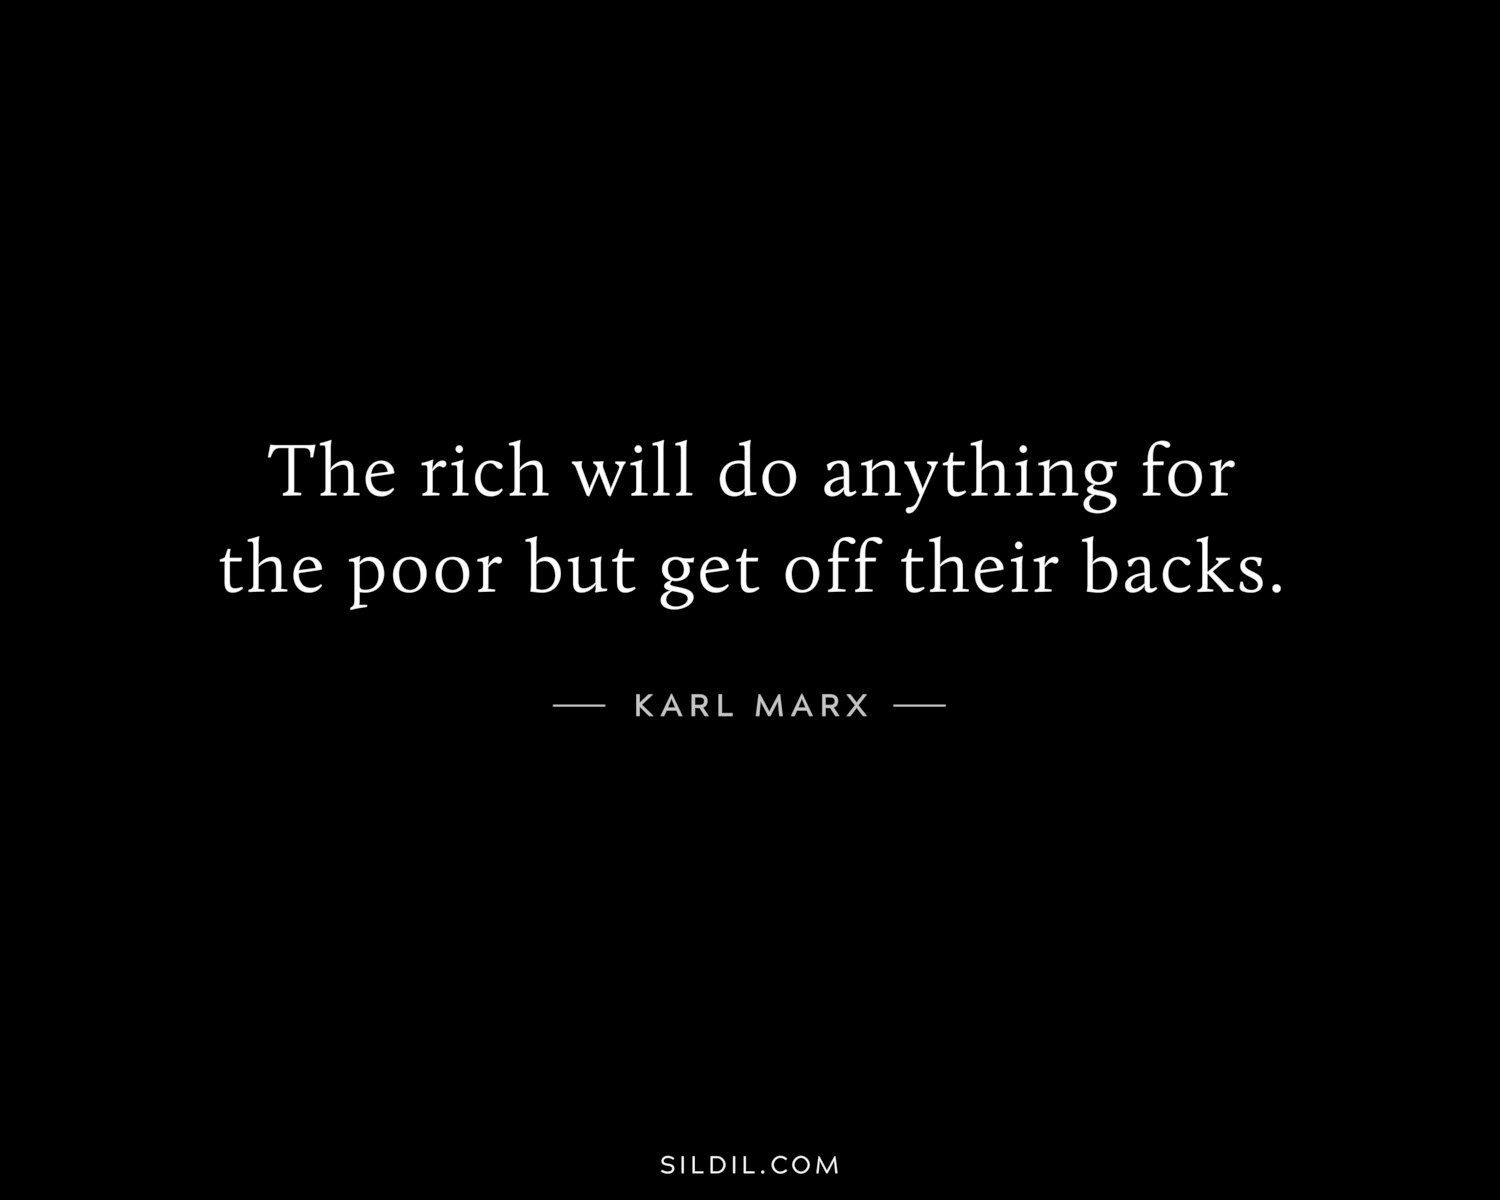 The rich will do anything for the poor but get off their backs.